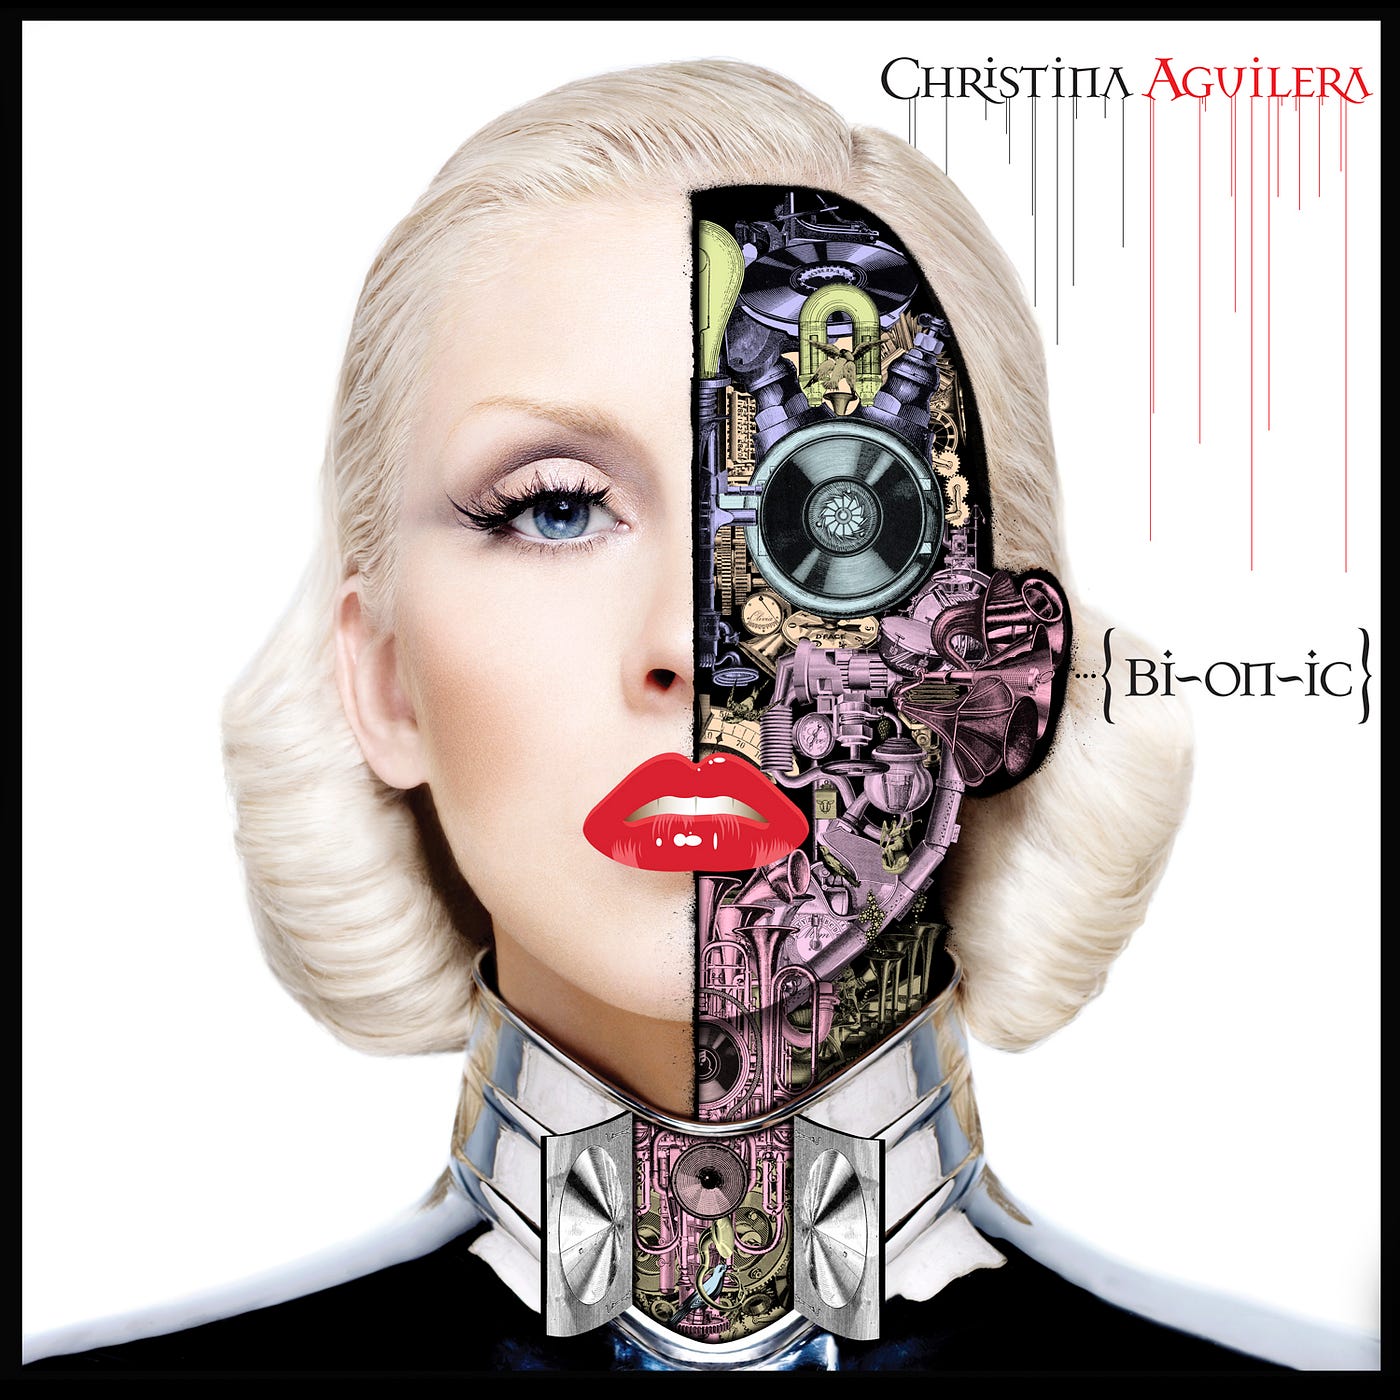 Christina Aguilera's “Bionic” — always needs justice | by Gia Bao